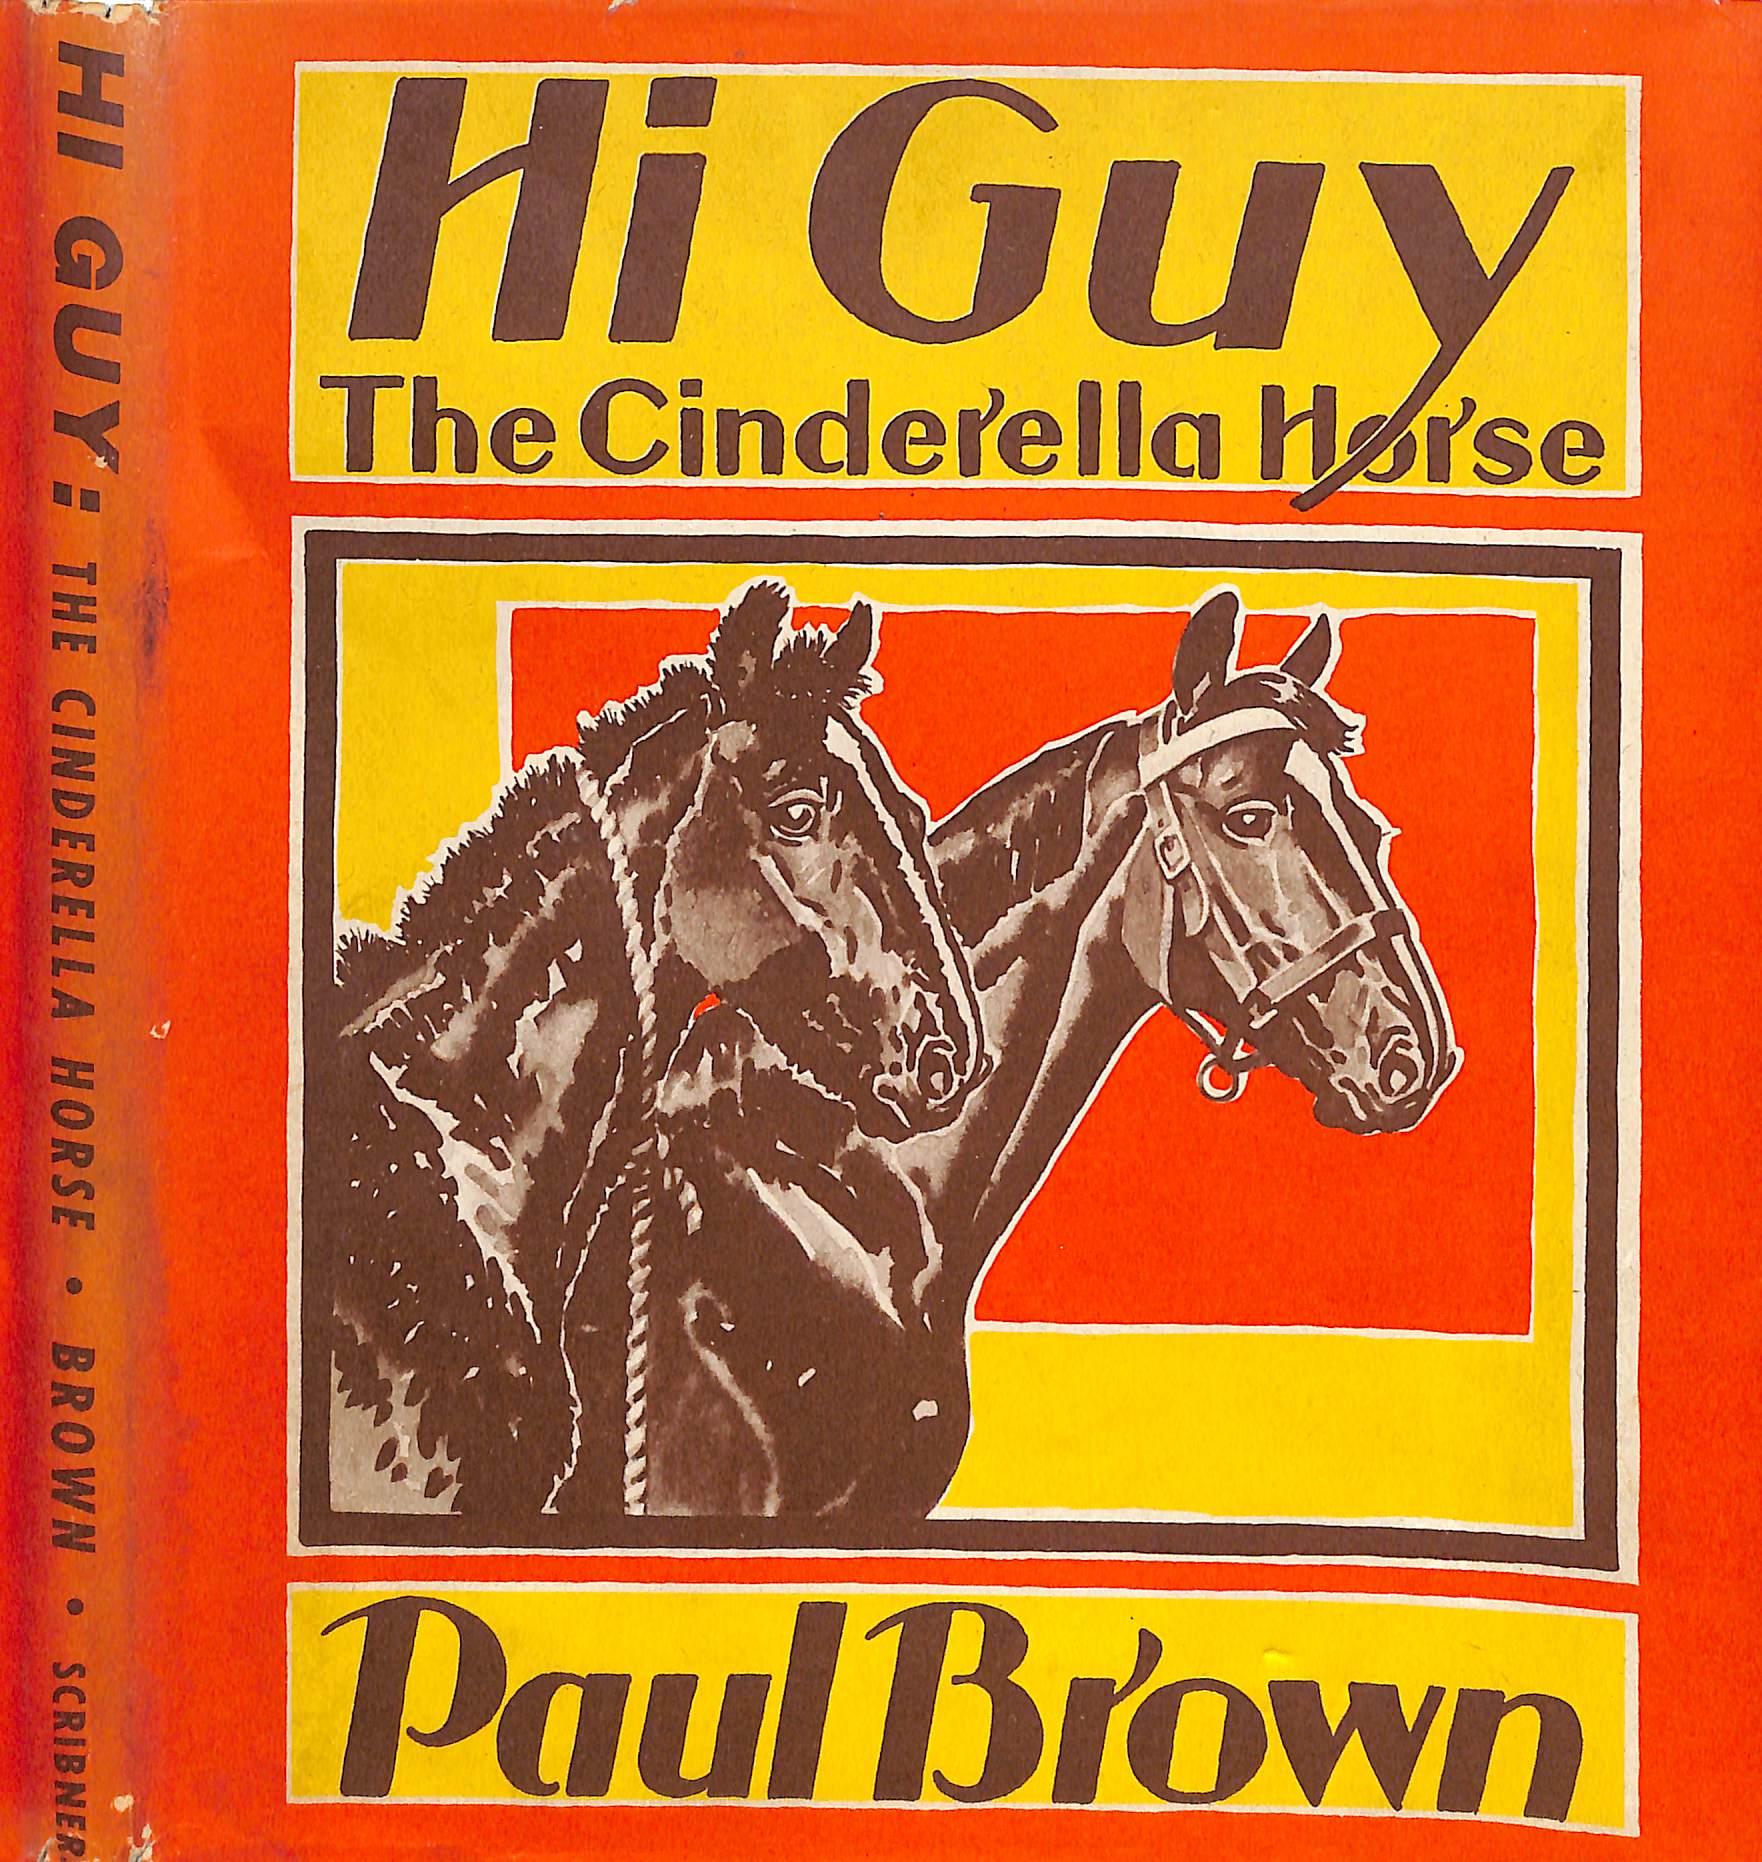 Original 1944 Pencil Drawing From Hi, Guy! The Cinderella Horse By Paul Brown 25 For Sale 5